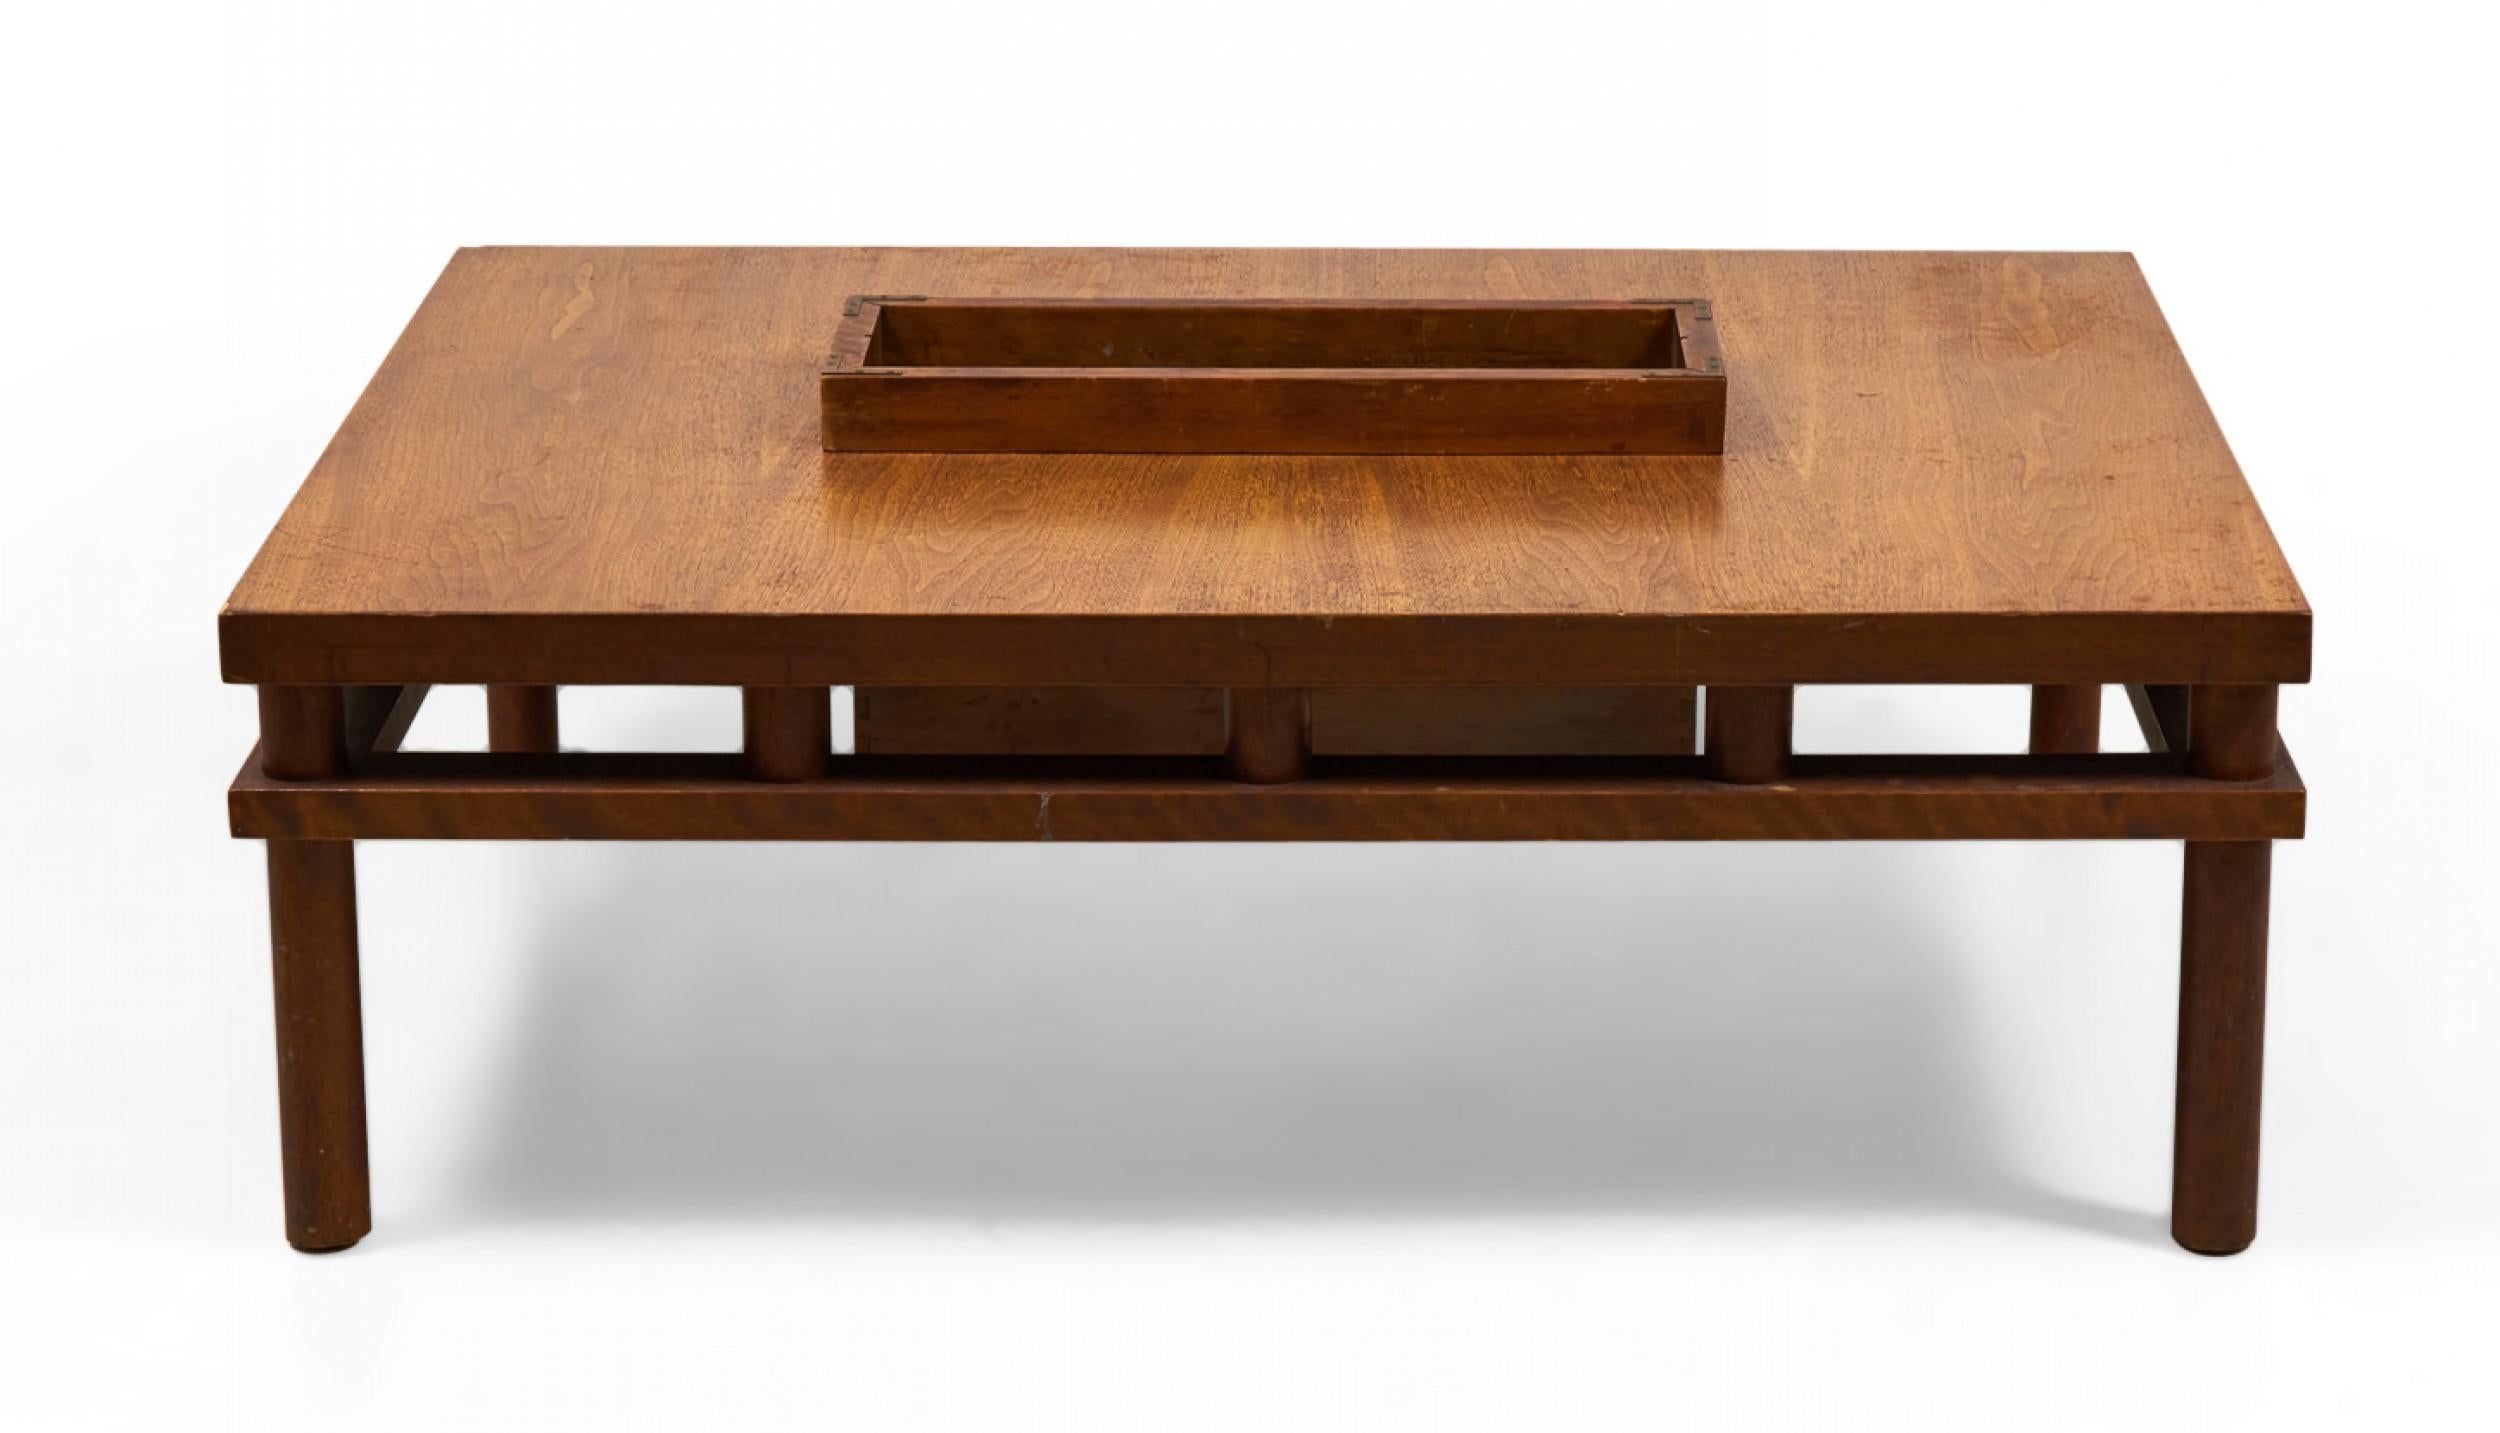 American mid-century rectangular walnut coffee table with removable central inset magazine box supported on four square walnut legs. (T.H. ROBSJOHN-GIBBINGS FOR WIDDICOMB FURNITURE COMPANY)